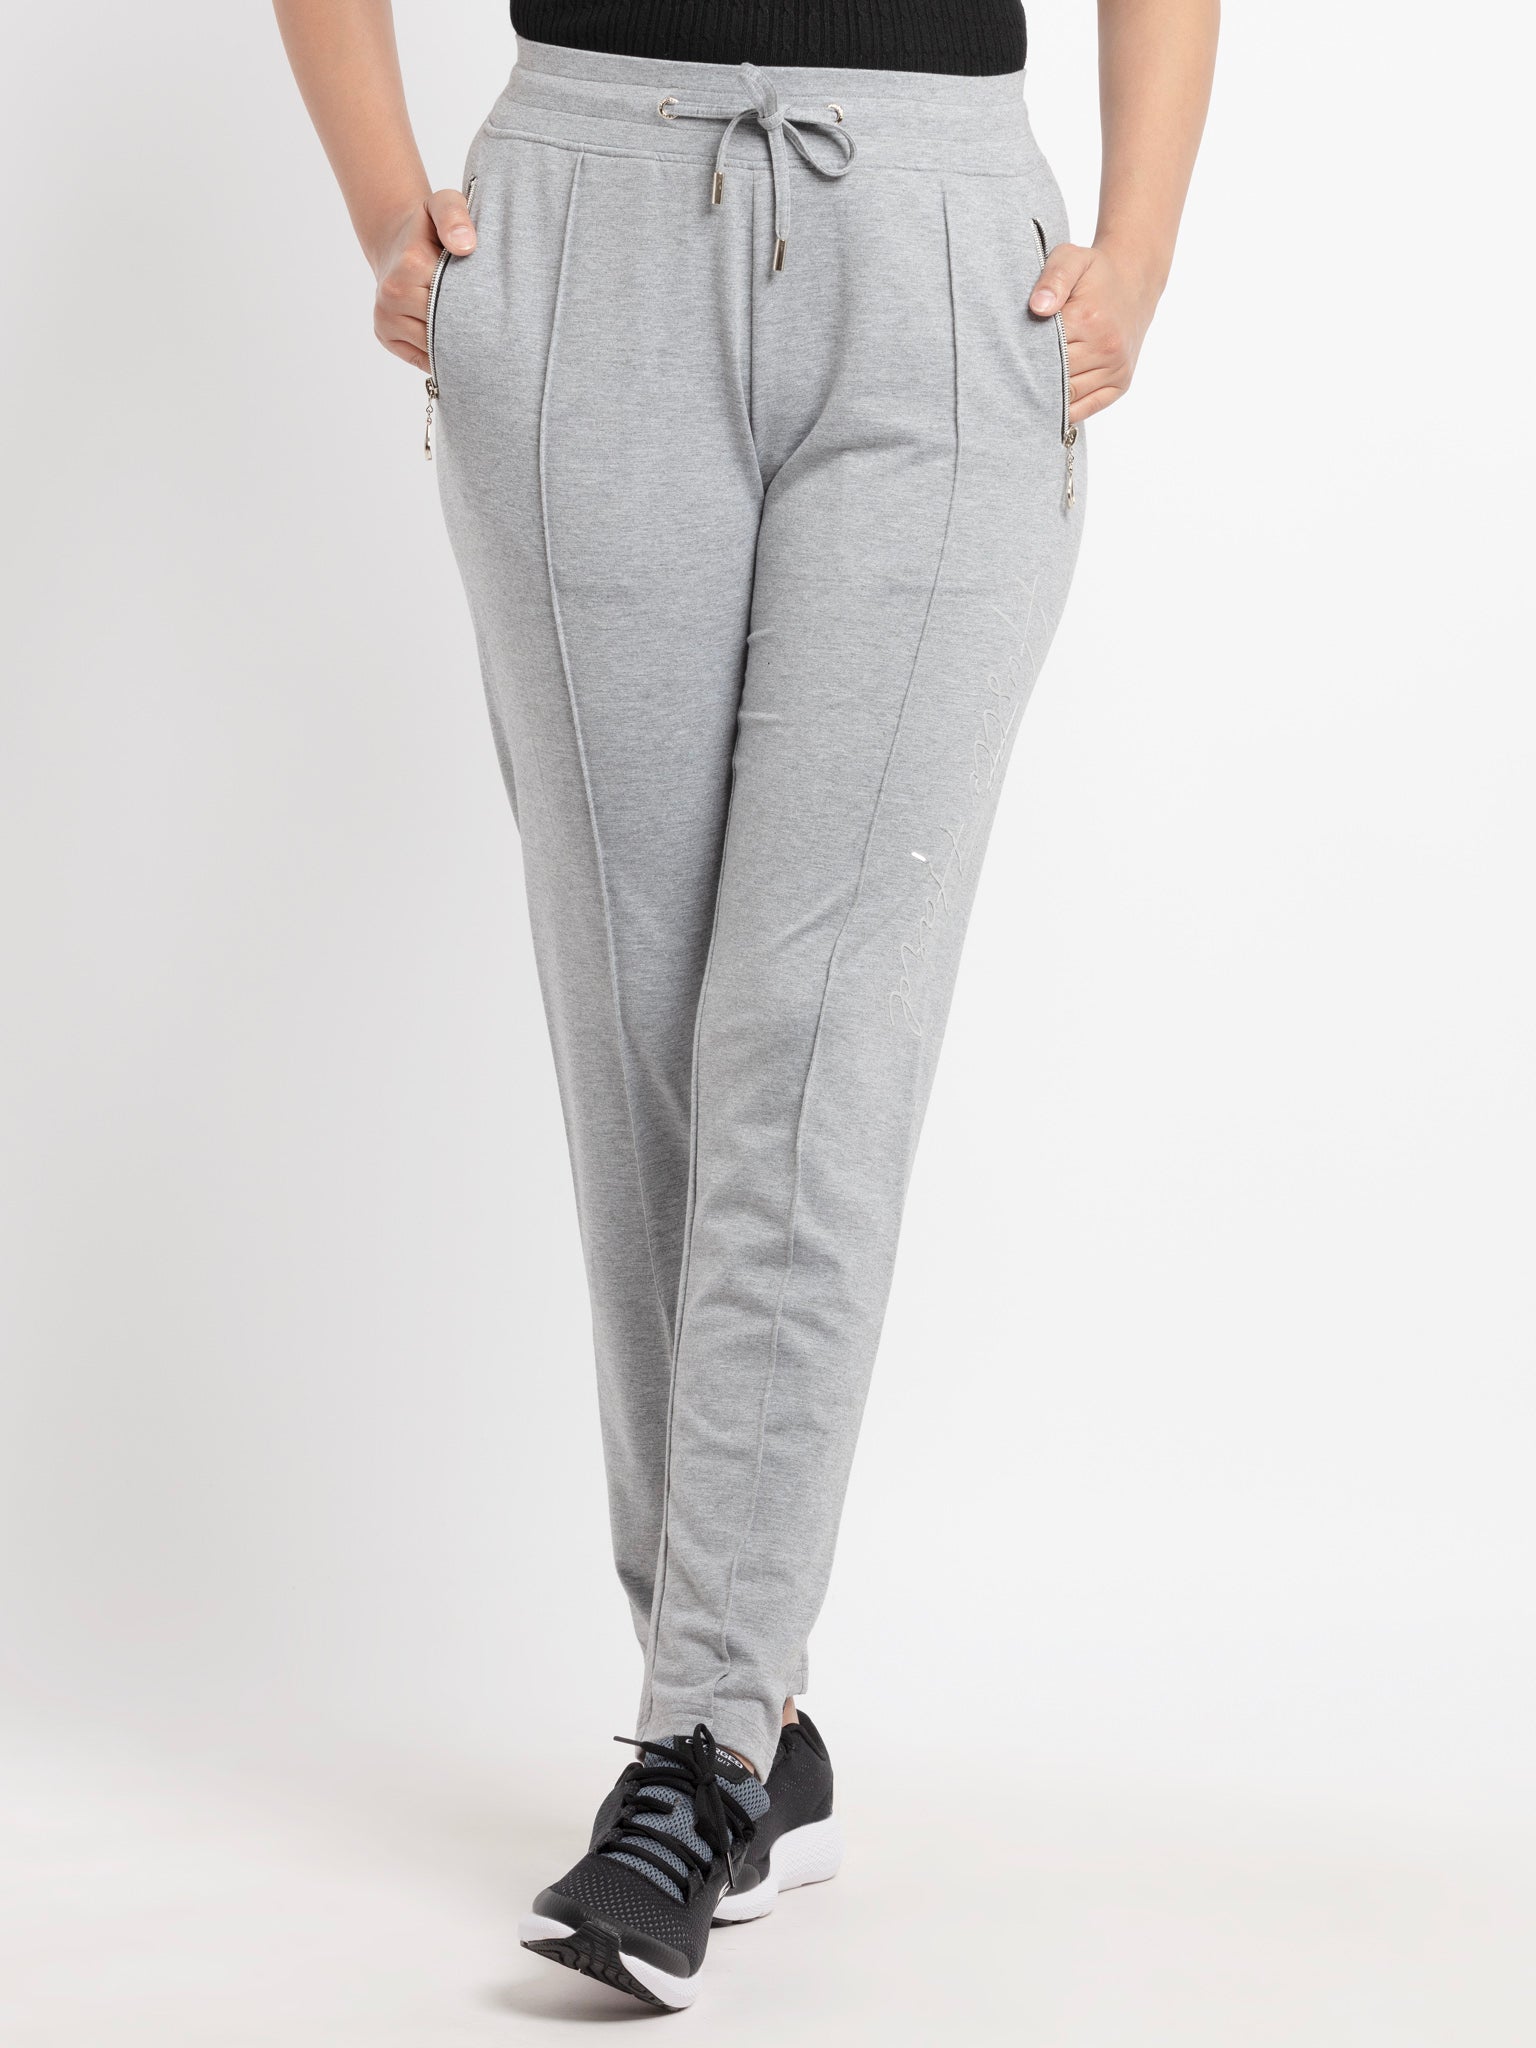 Status Quo |Womens Ankle Length Solid Joggers - S, M, L, XL, XXL,3XL